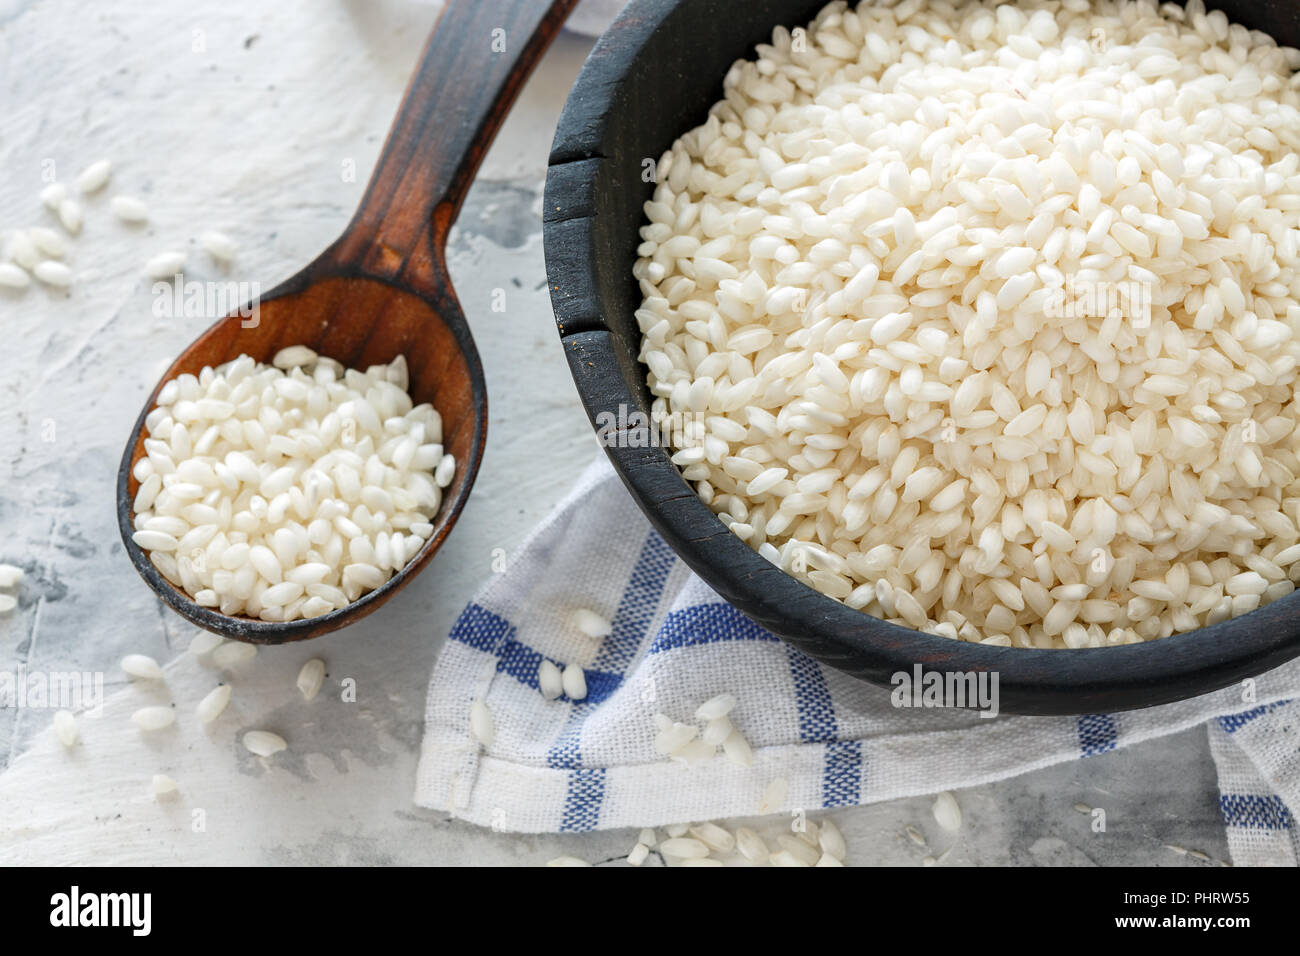 White round rice in a wooden bowl. Stock Photo